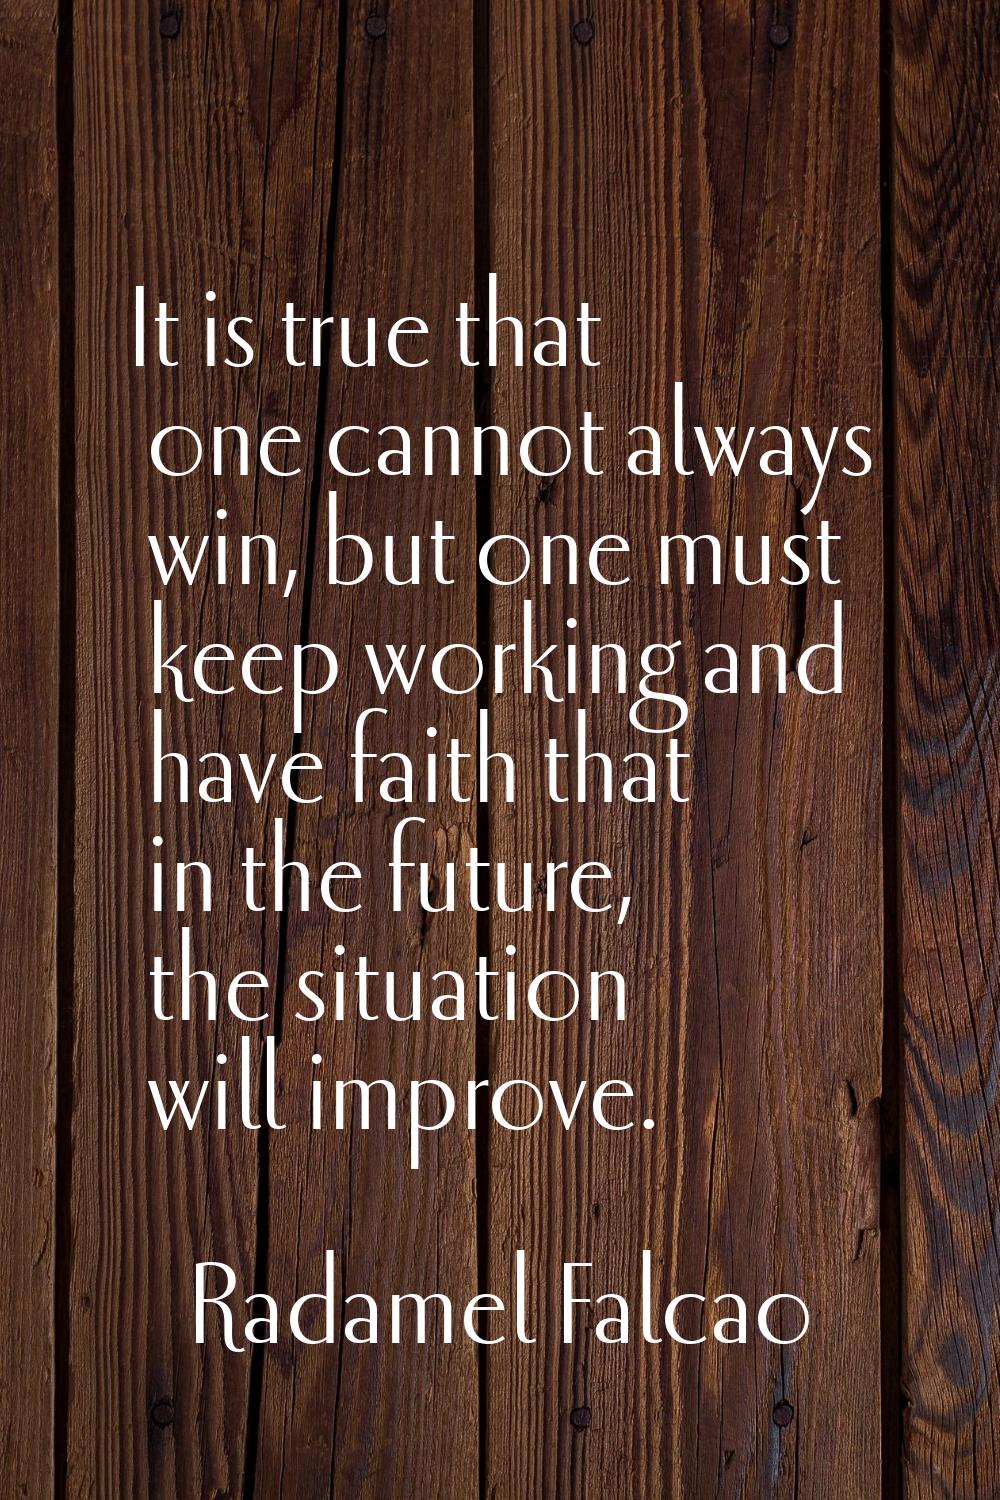 It is true that one cannot always win, but one must keep working and have faith that in the future,